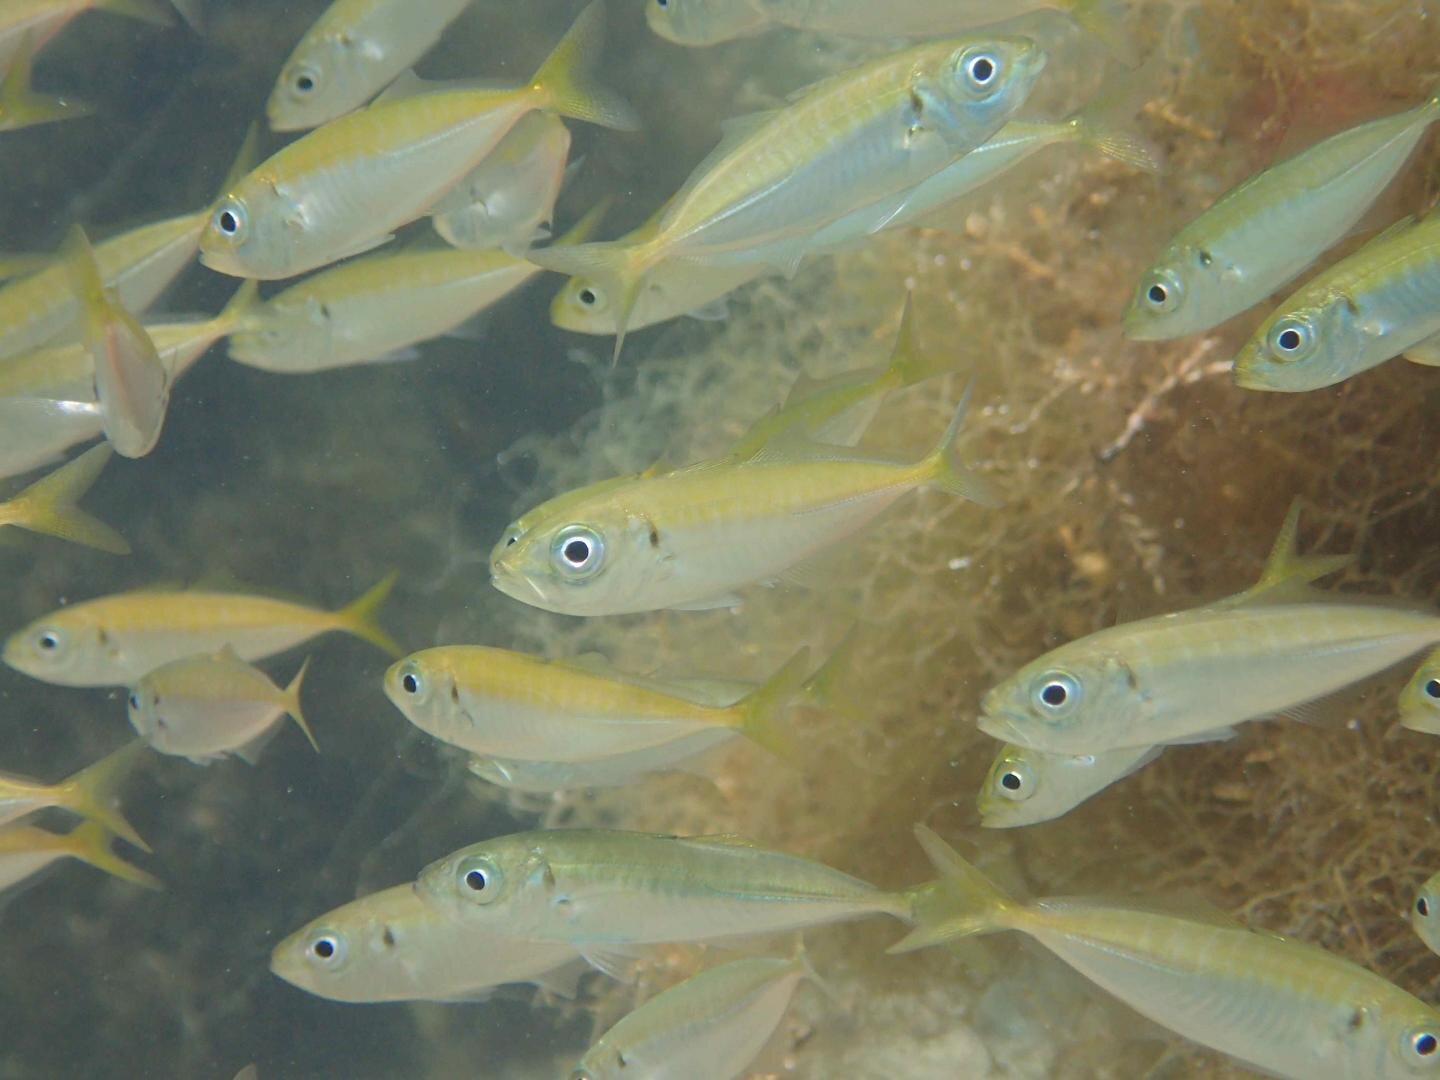 Using DNA in the water tell us how many fish are there - Phys.org